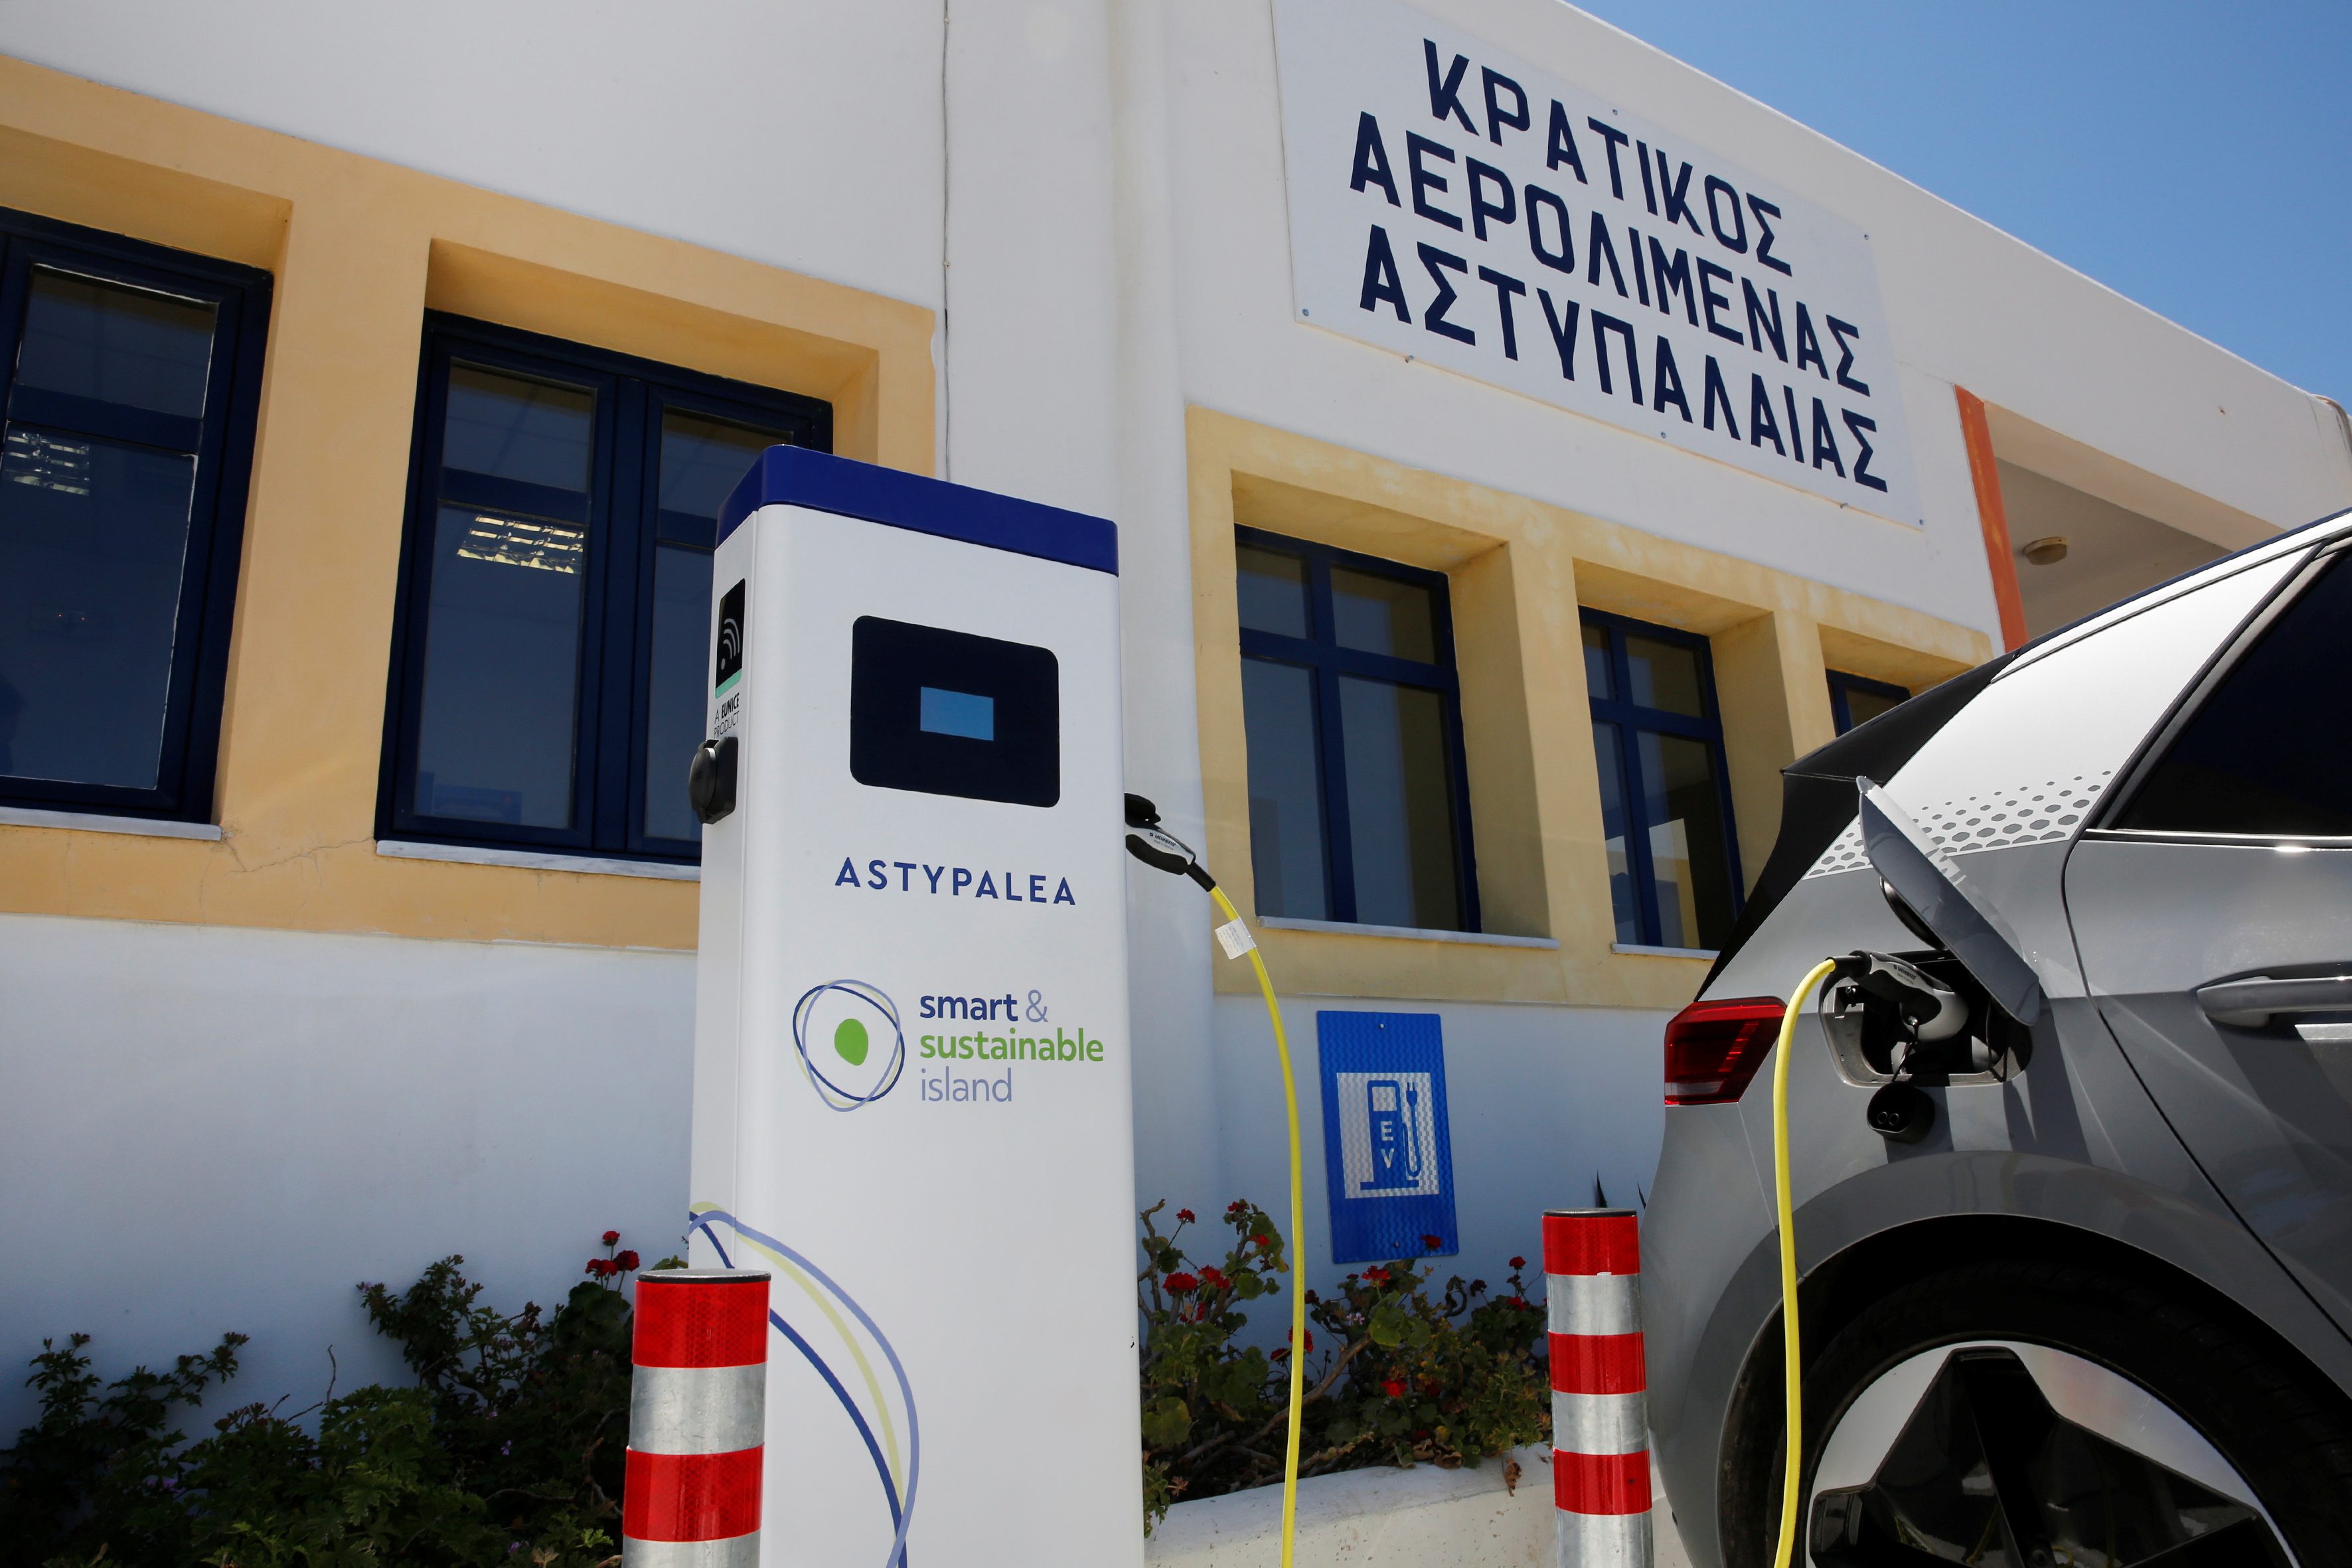 A Volkswagen ID.4 electric car is charged at the premises of the airport on the island of Astypalea, Greece, June 2, 2021. Alexandros Vlachos/Pool via REUTERS